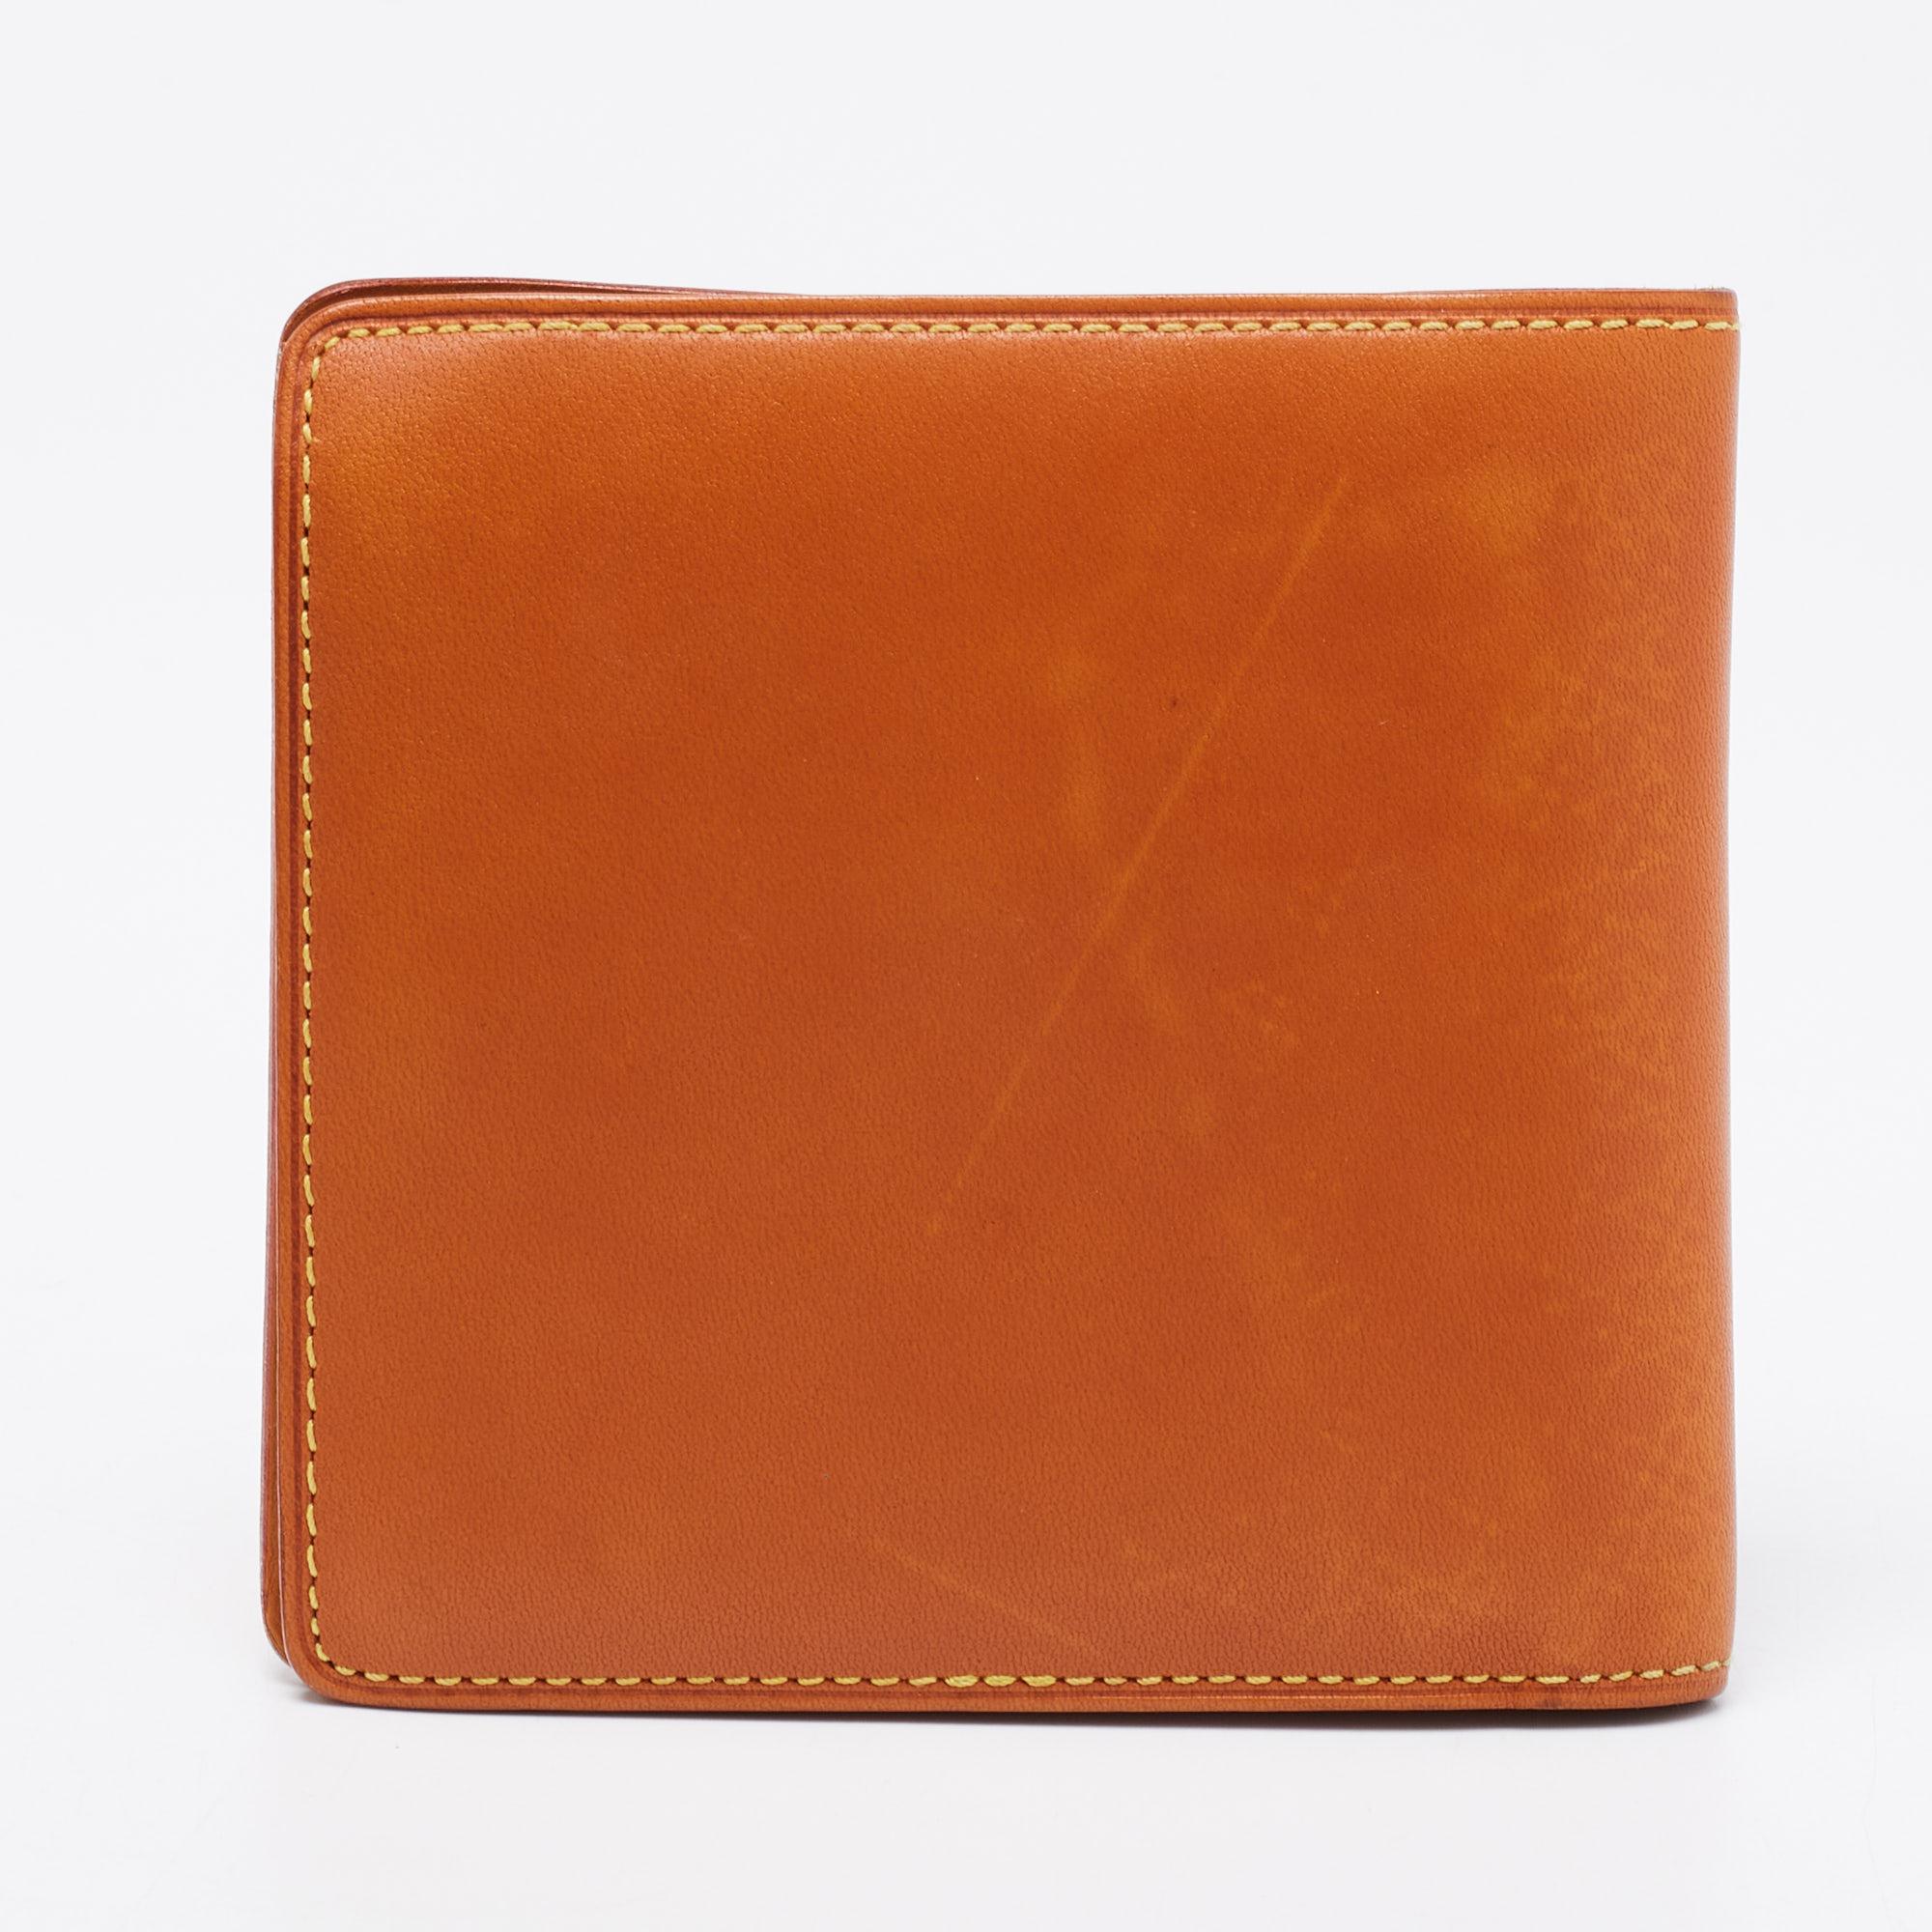 The compartmentalized interior of this Louis Vuitton wallet will make for a luxurious and safe abode for your monetary essentials. Made from leather, it features an orange shade and a brand signature decorates its front.

